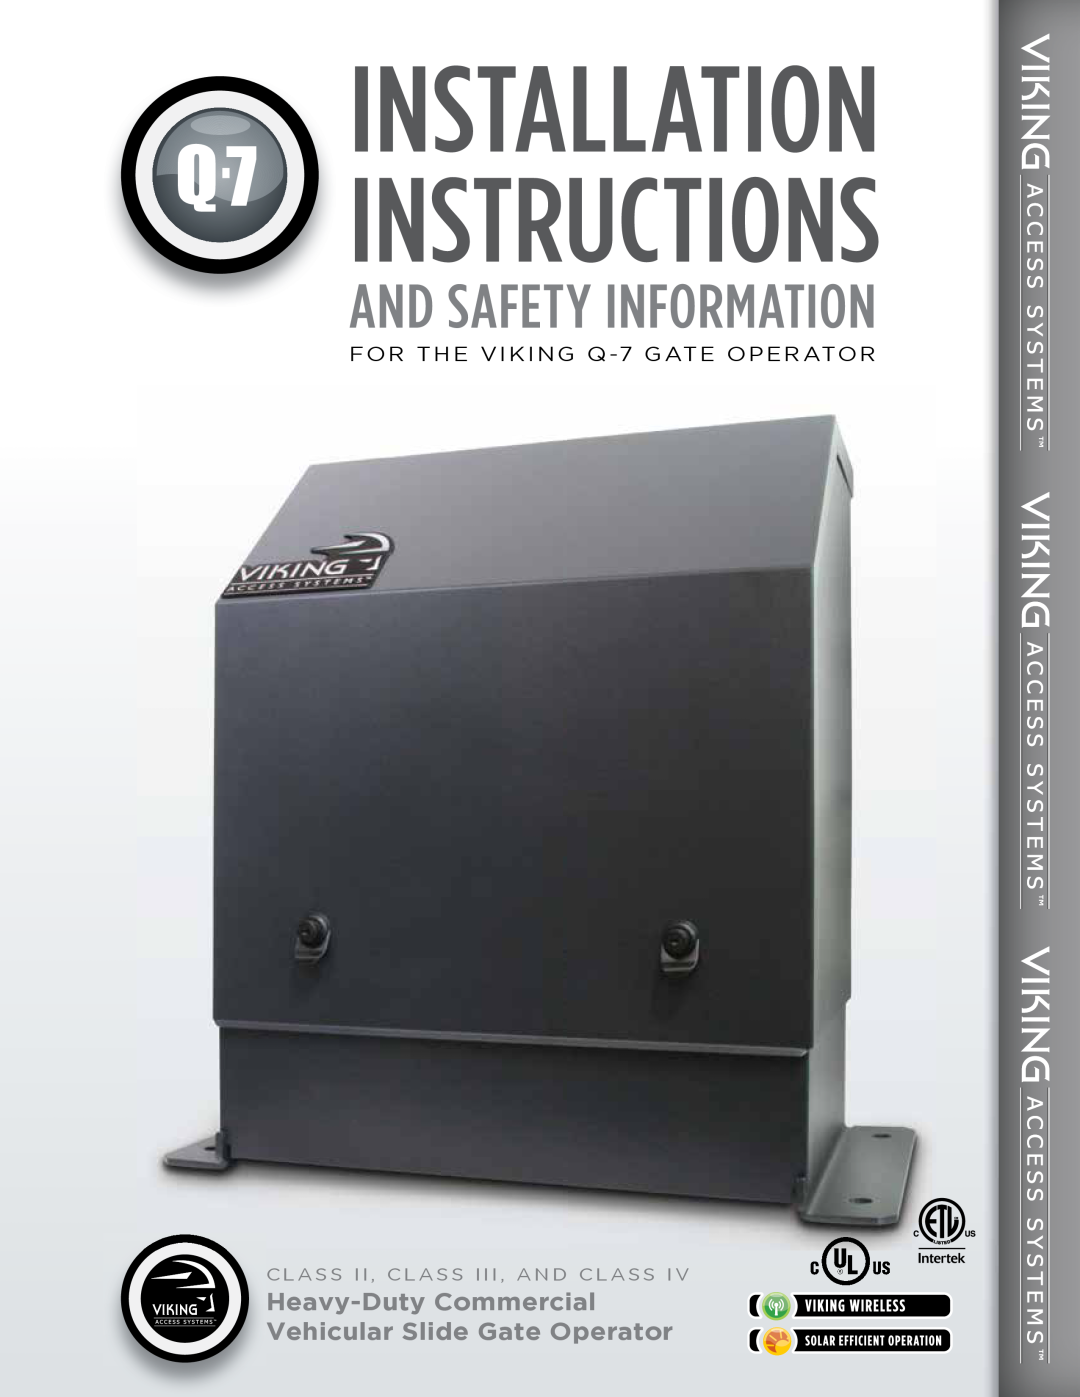 Viking Access Systems Q7 manual Instructions, Installation, And Safety Information, Heavy-DutyCommercial 